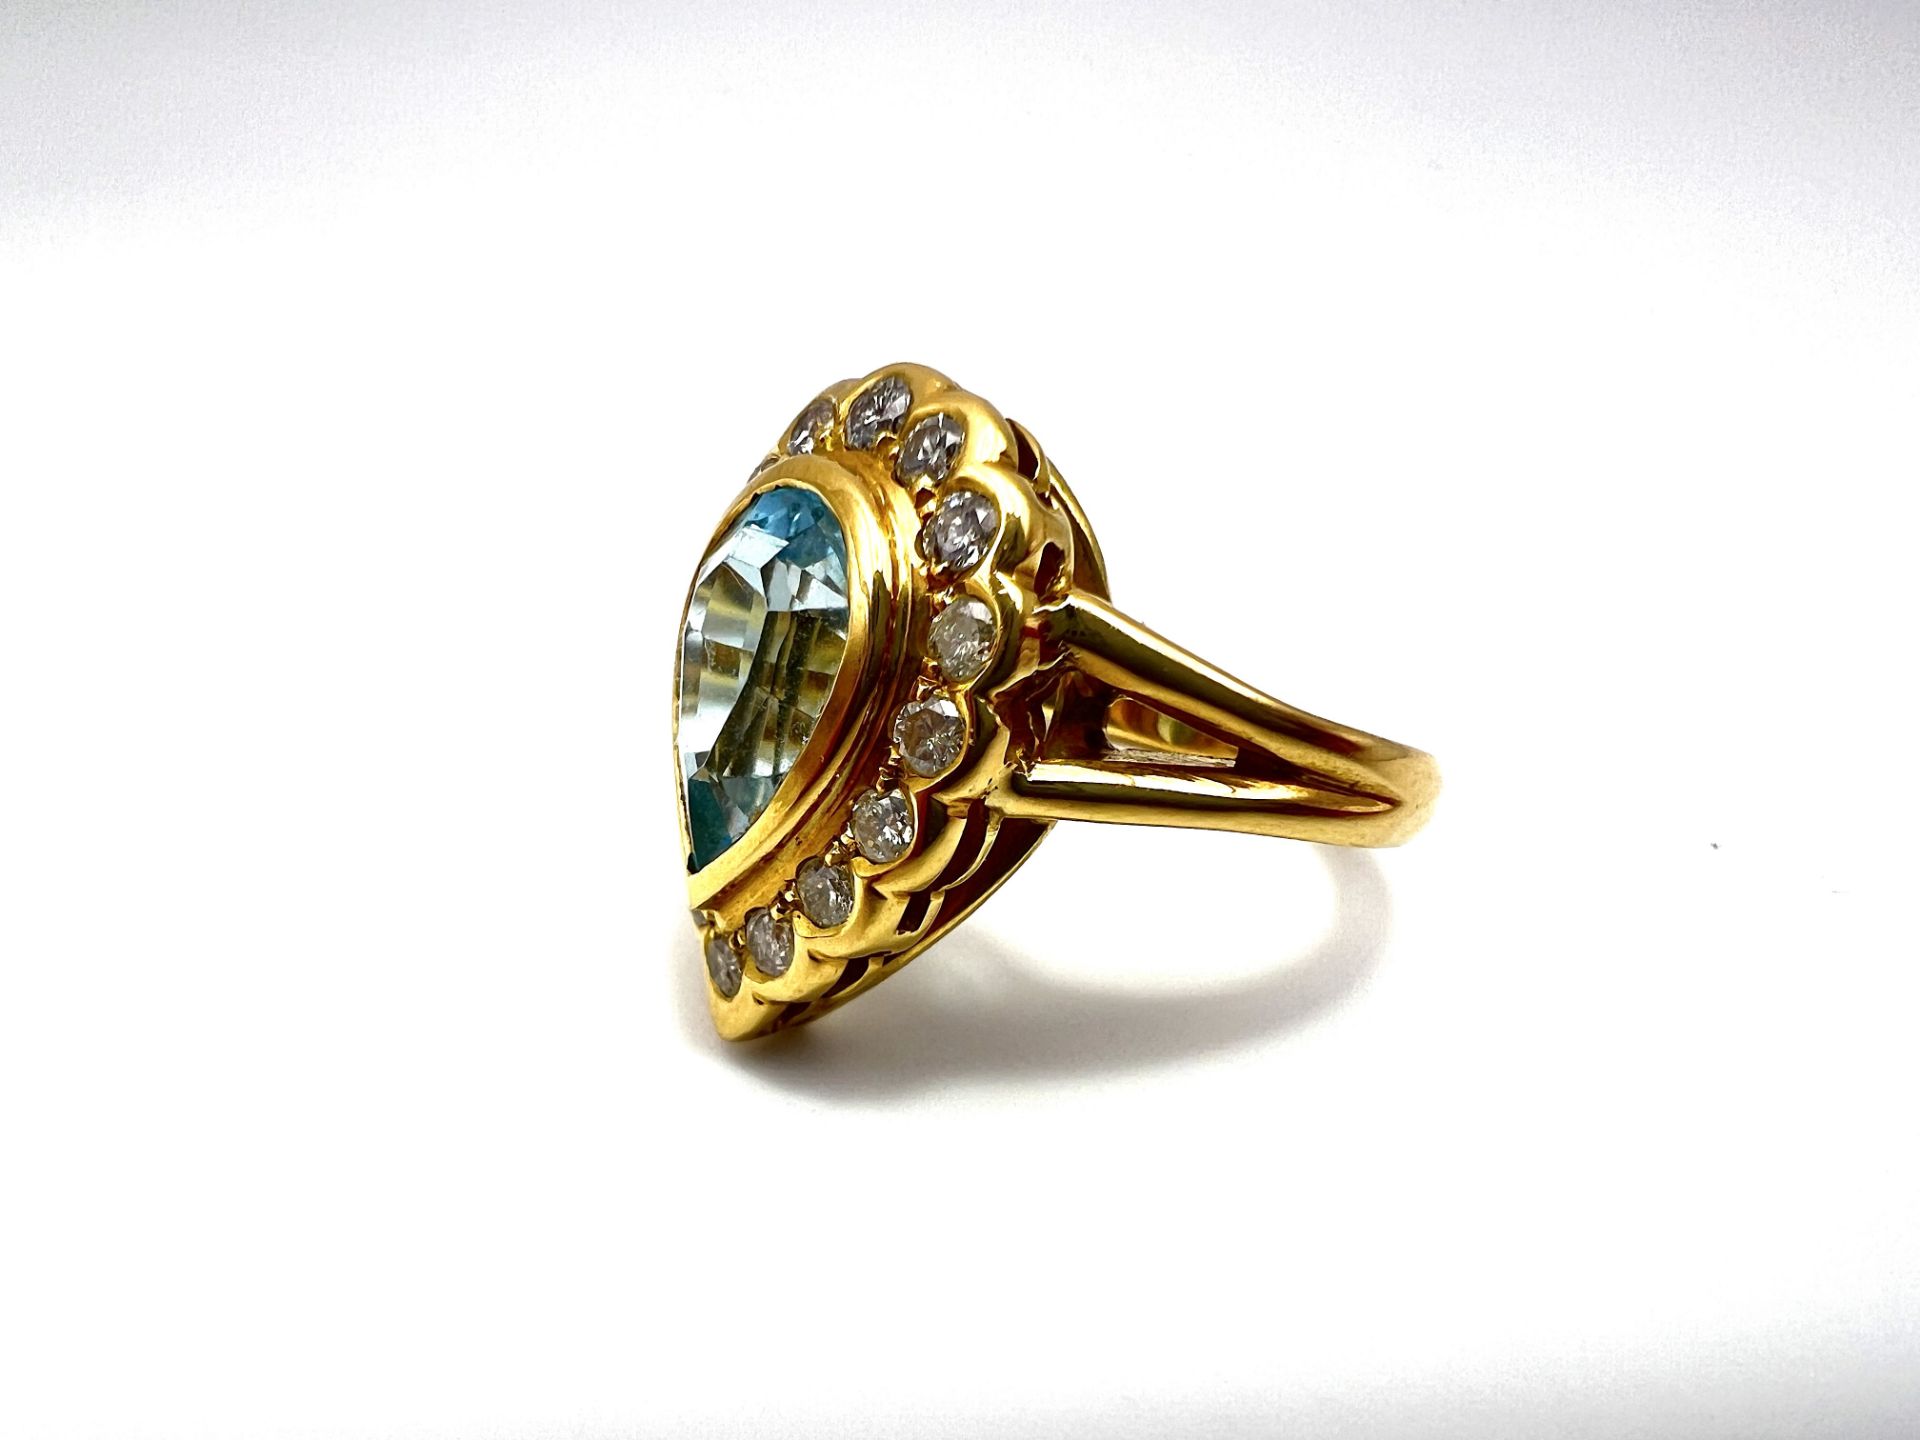 Diamond ring with blue topaz - Image 5 of 6